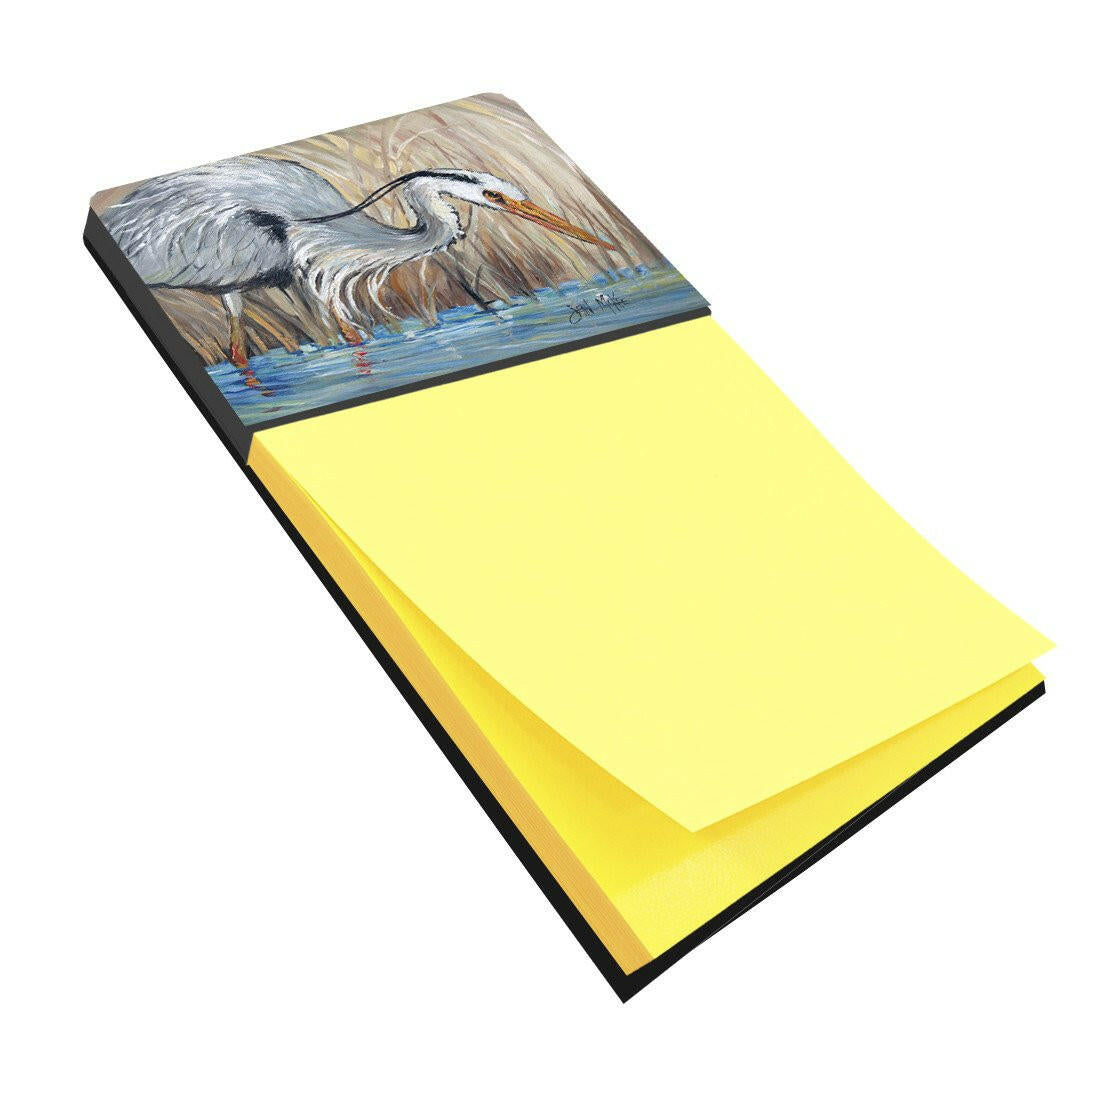 Blue Heron in the reeds Sticky Note Holder JMK1013SN by Caroline's Treasures